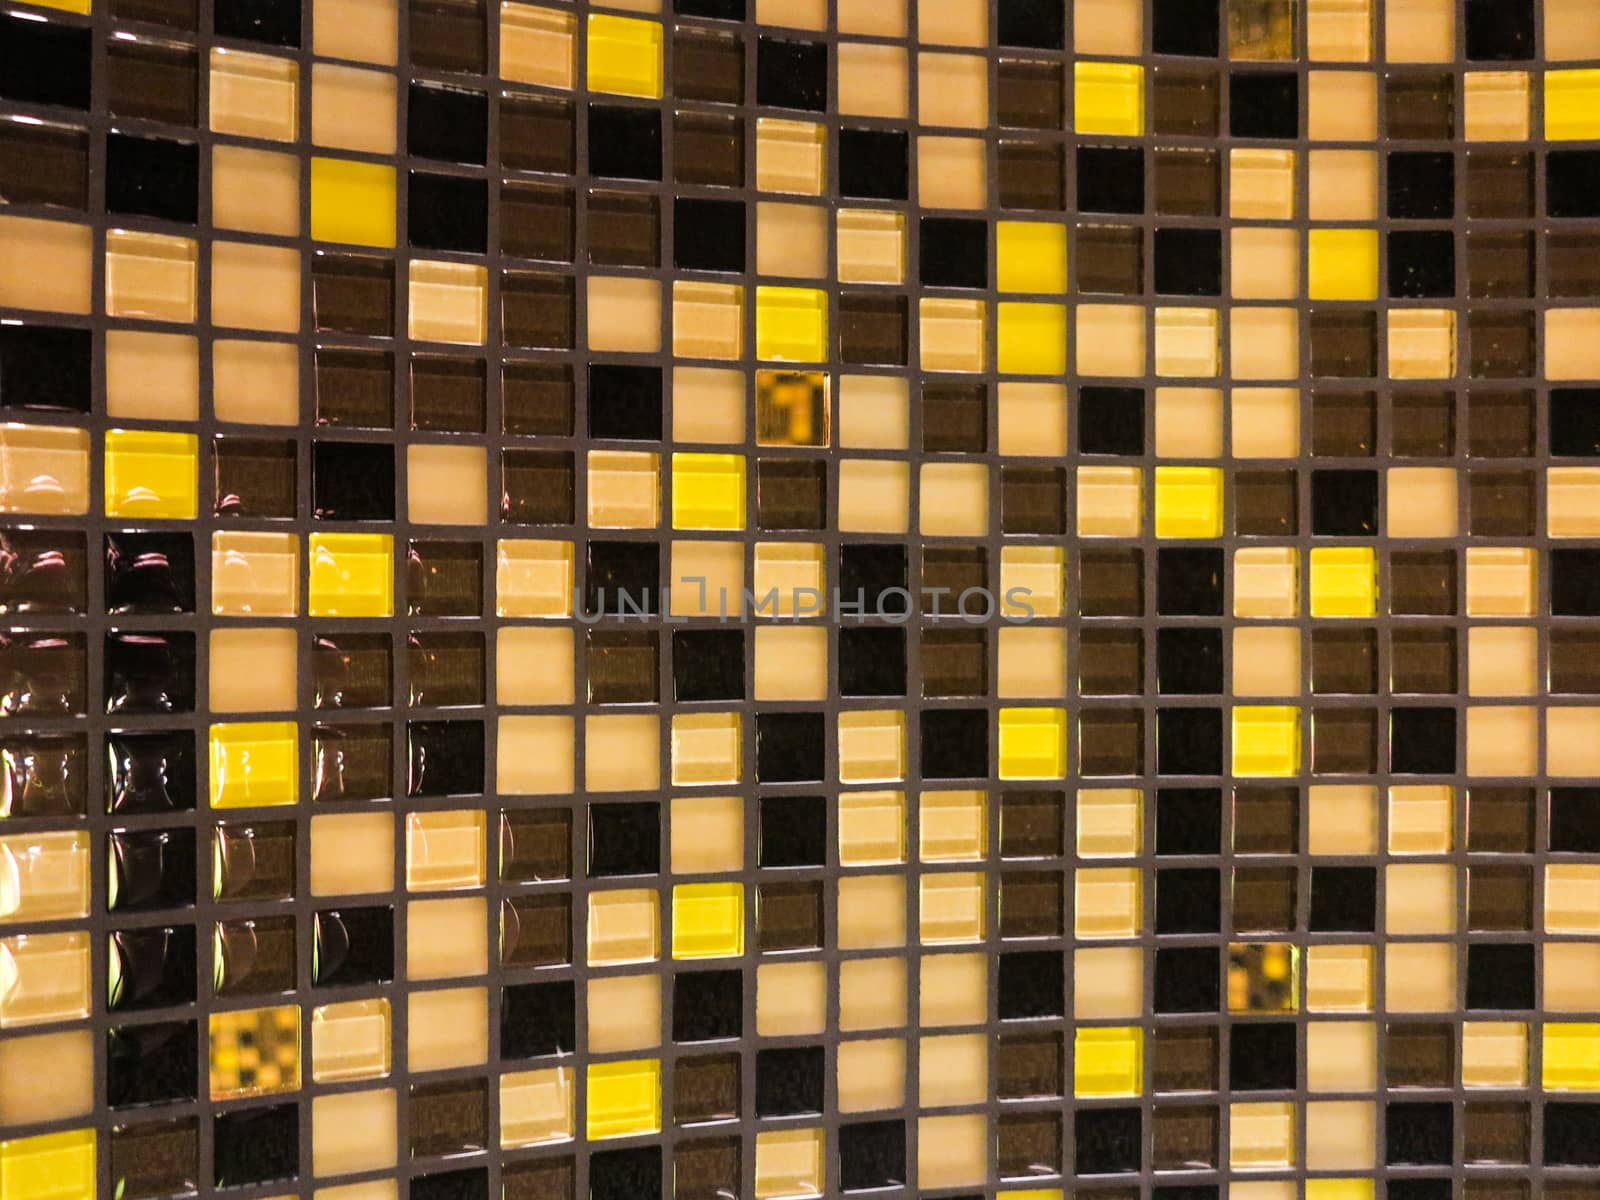 A checkered tile pattern of different colors